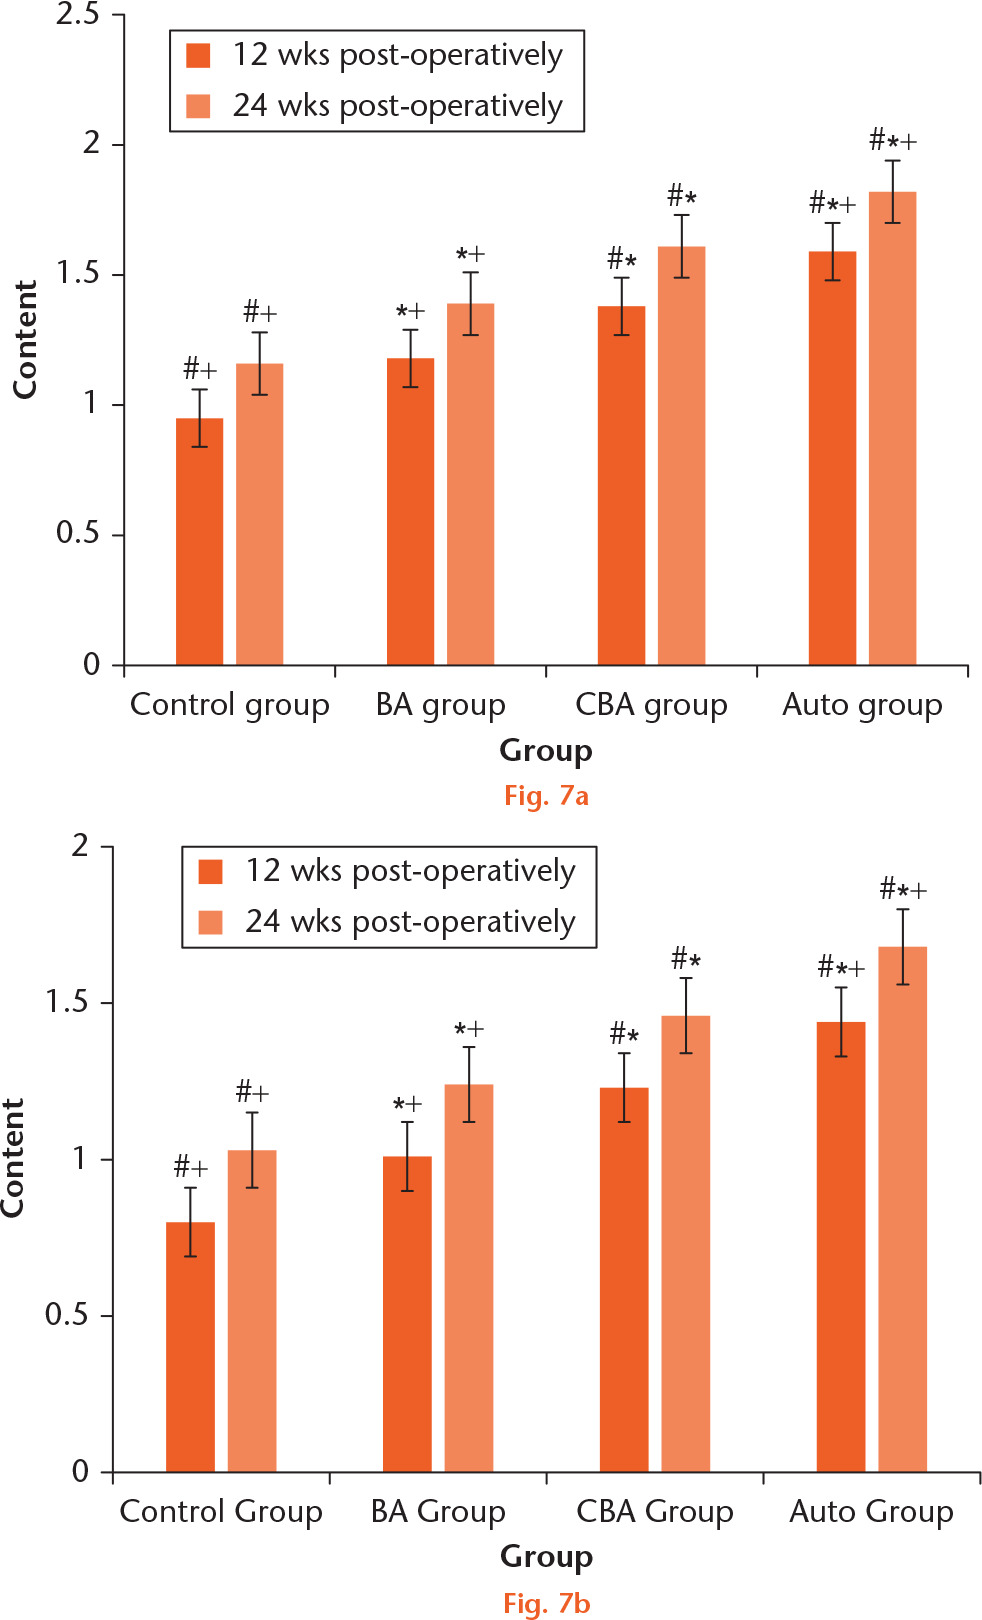  
            Charts showing comparison of the a) aggrecan and b) COL II content in the control, BA, CBA and Auto groupafter surgery. Analysis of variance (ANOVA) and least-significant differences (LSD) test. Compared with control group, *p < 0.05; compared with BA group, #p < 0.05; compared with CBA group, +p < 0.05.
          